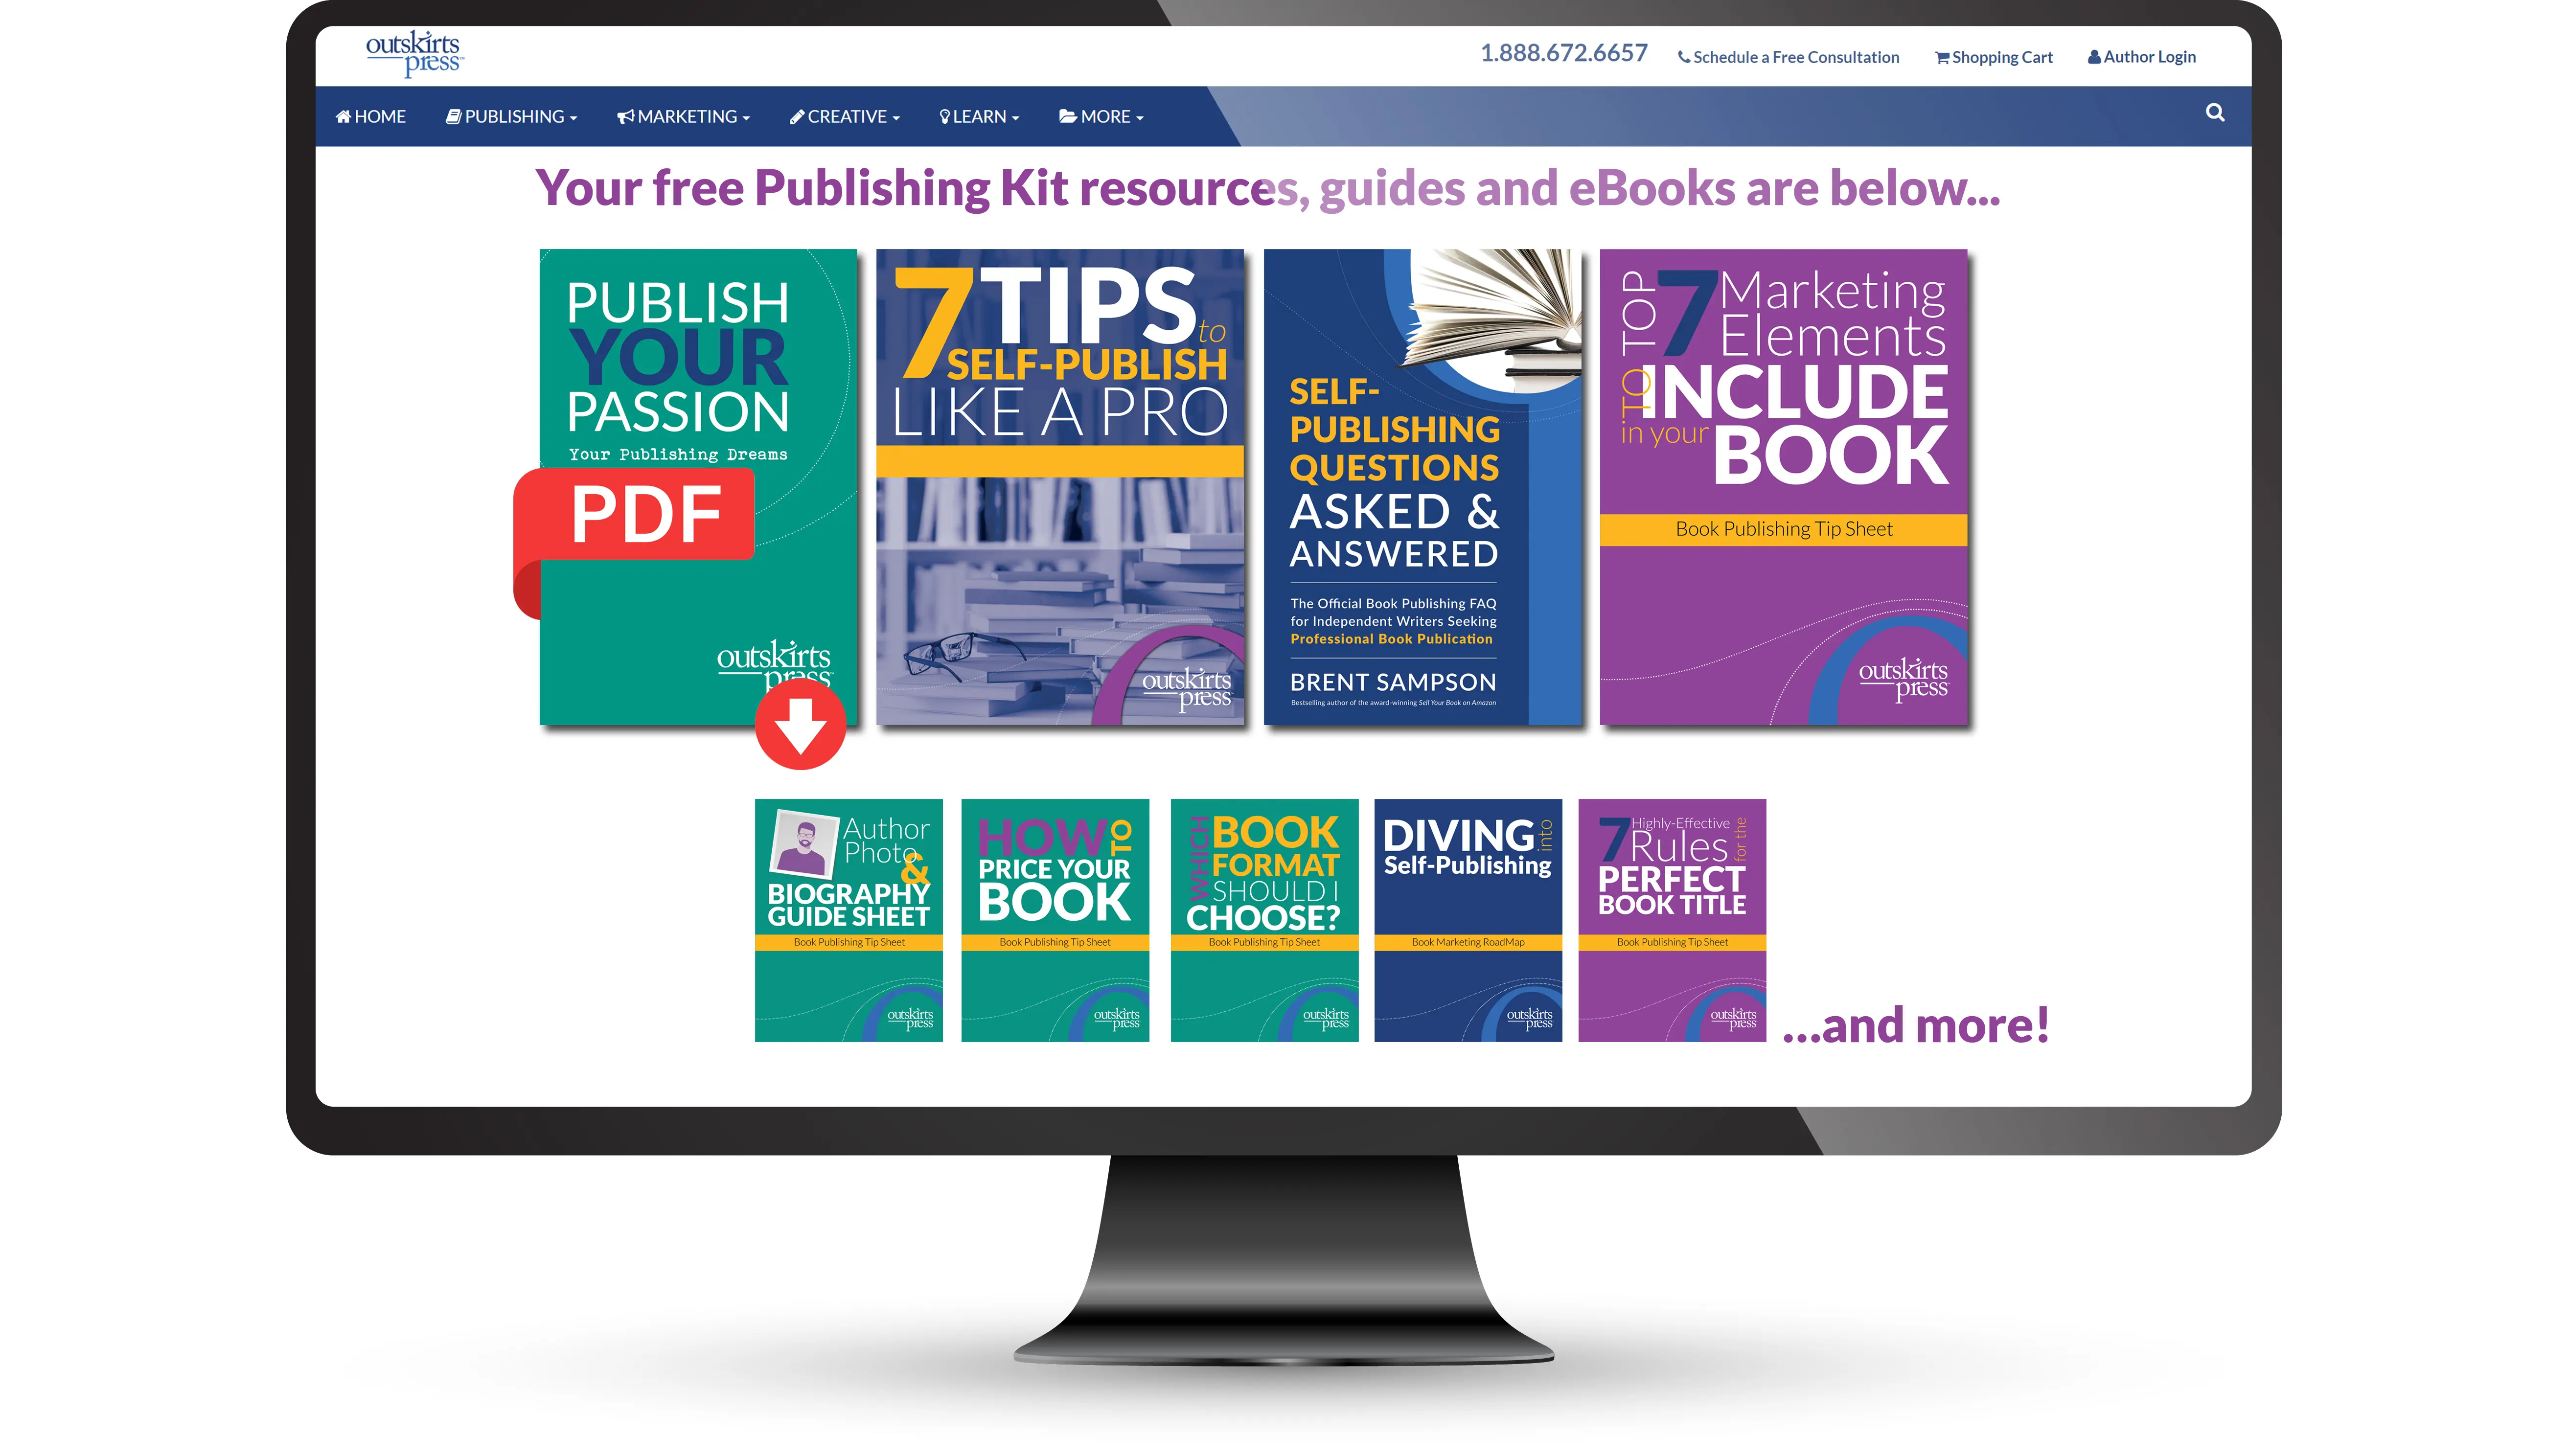 Get free self-publishing help and resources in the Outskirts Press Publishing Kit.